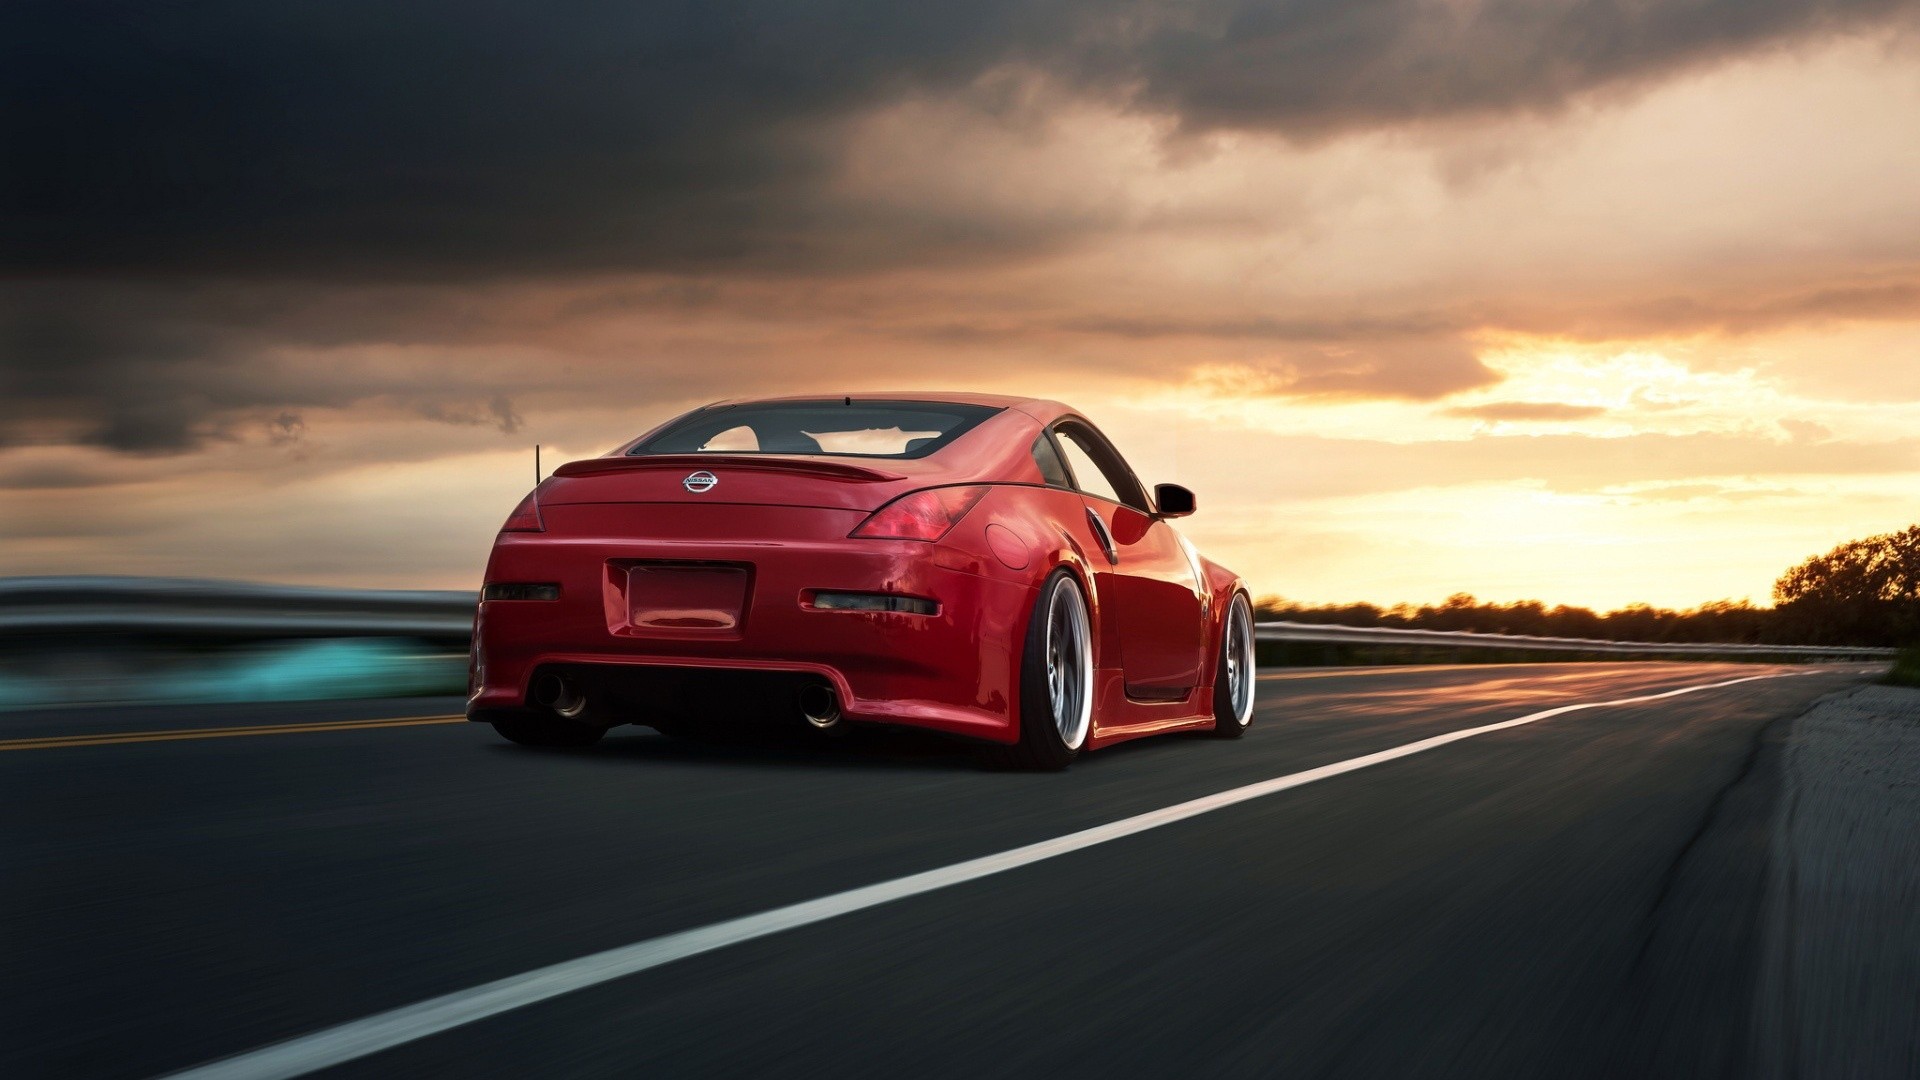 Nissan 350Z, Stance, Car, Red Cars Wallpaper